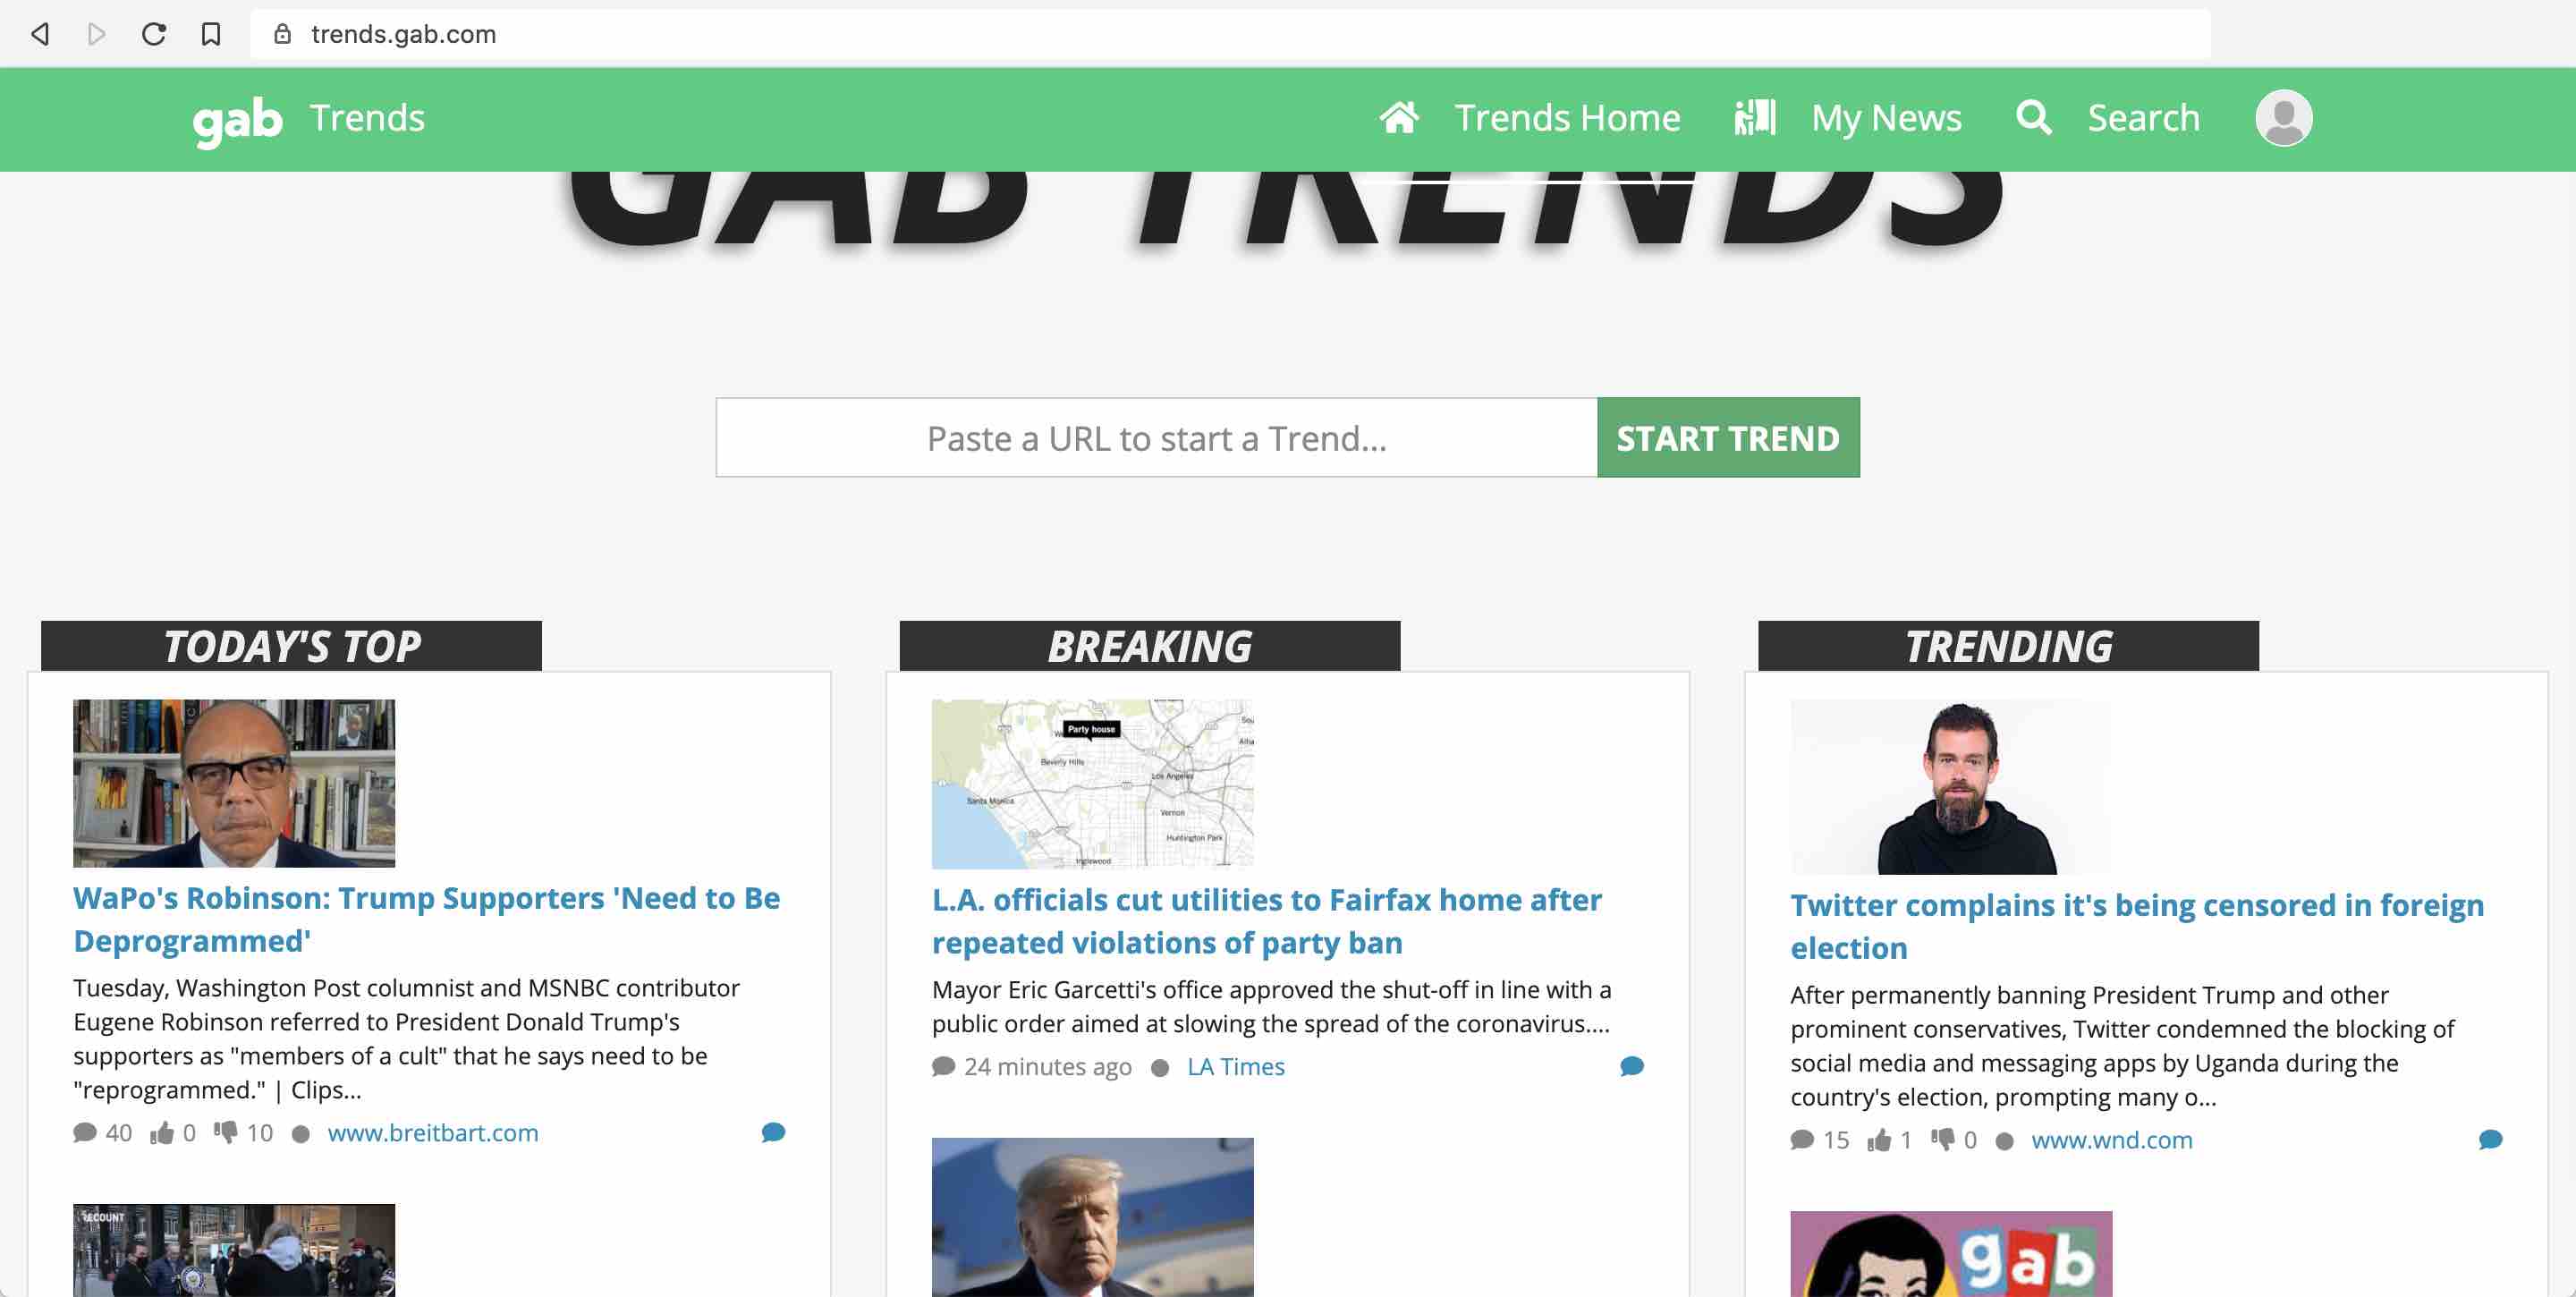 The trends.gab.com homepage after scrolling down just below the fold, showing the latest trending articles.